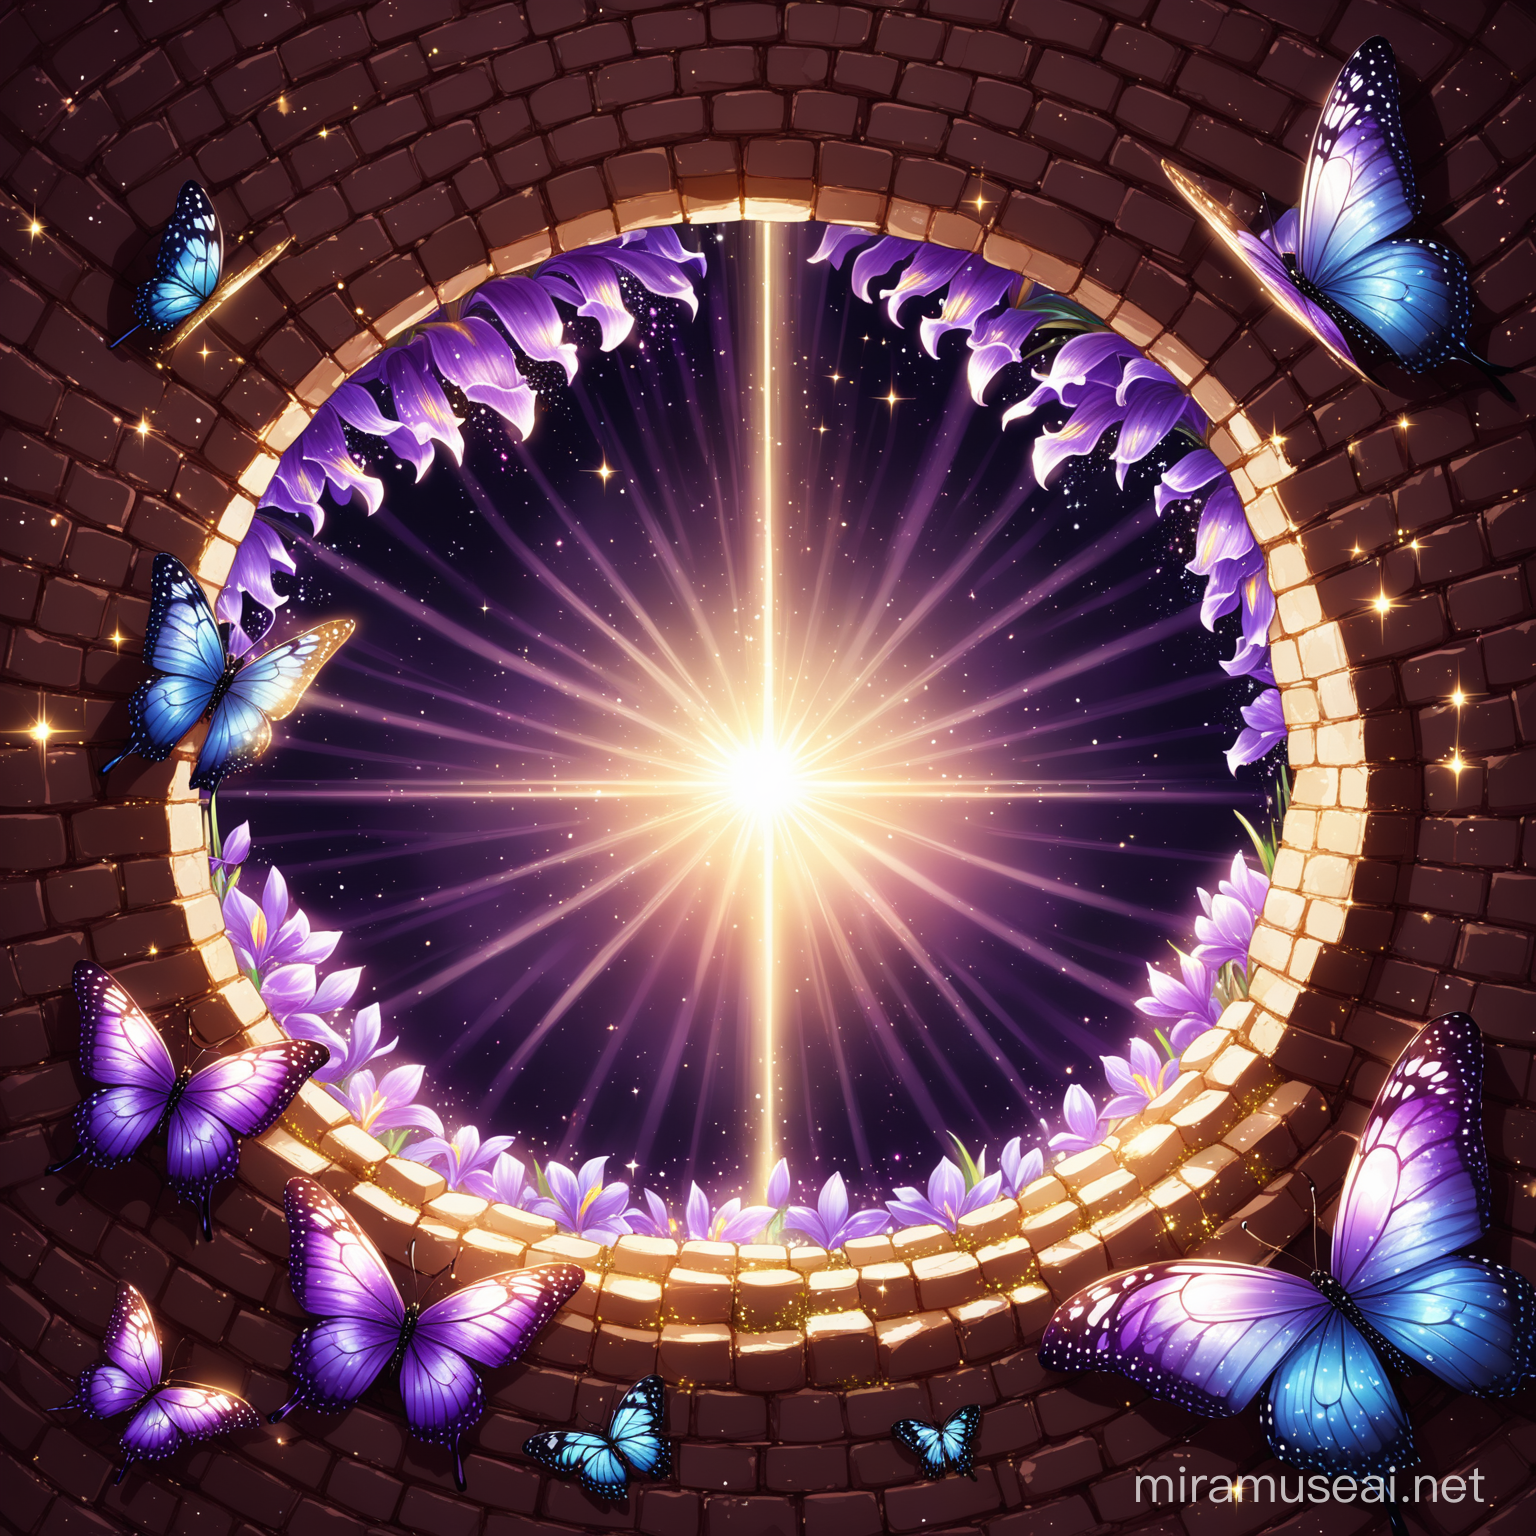 Enchanting Butterfly Wing Portal in Wall with Glittering Forest Inside